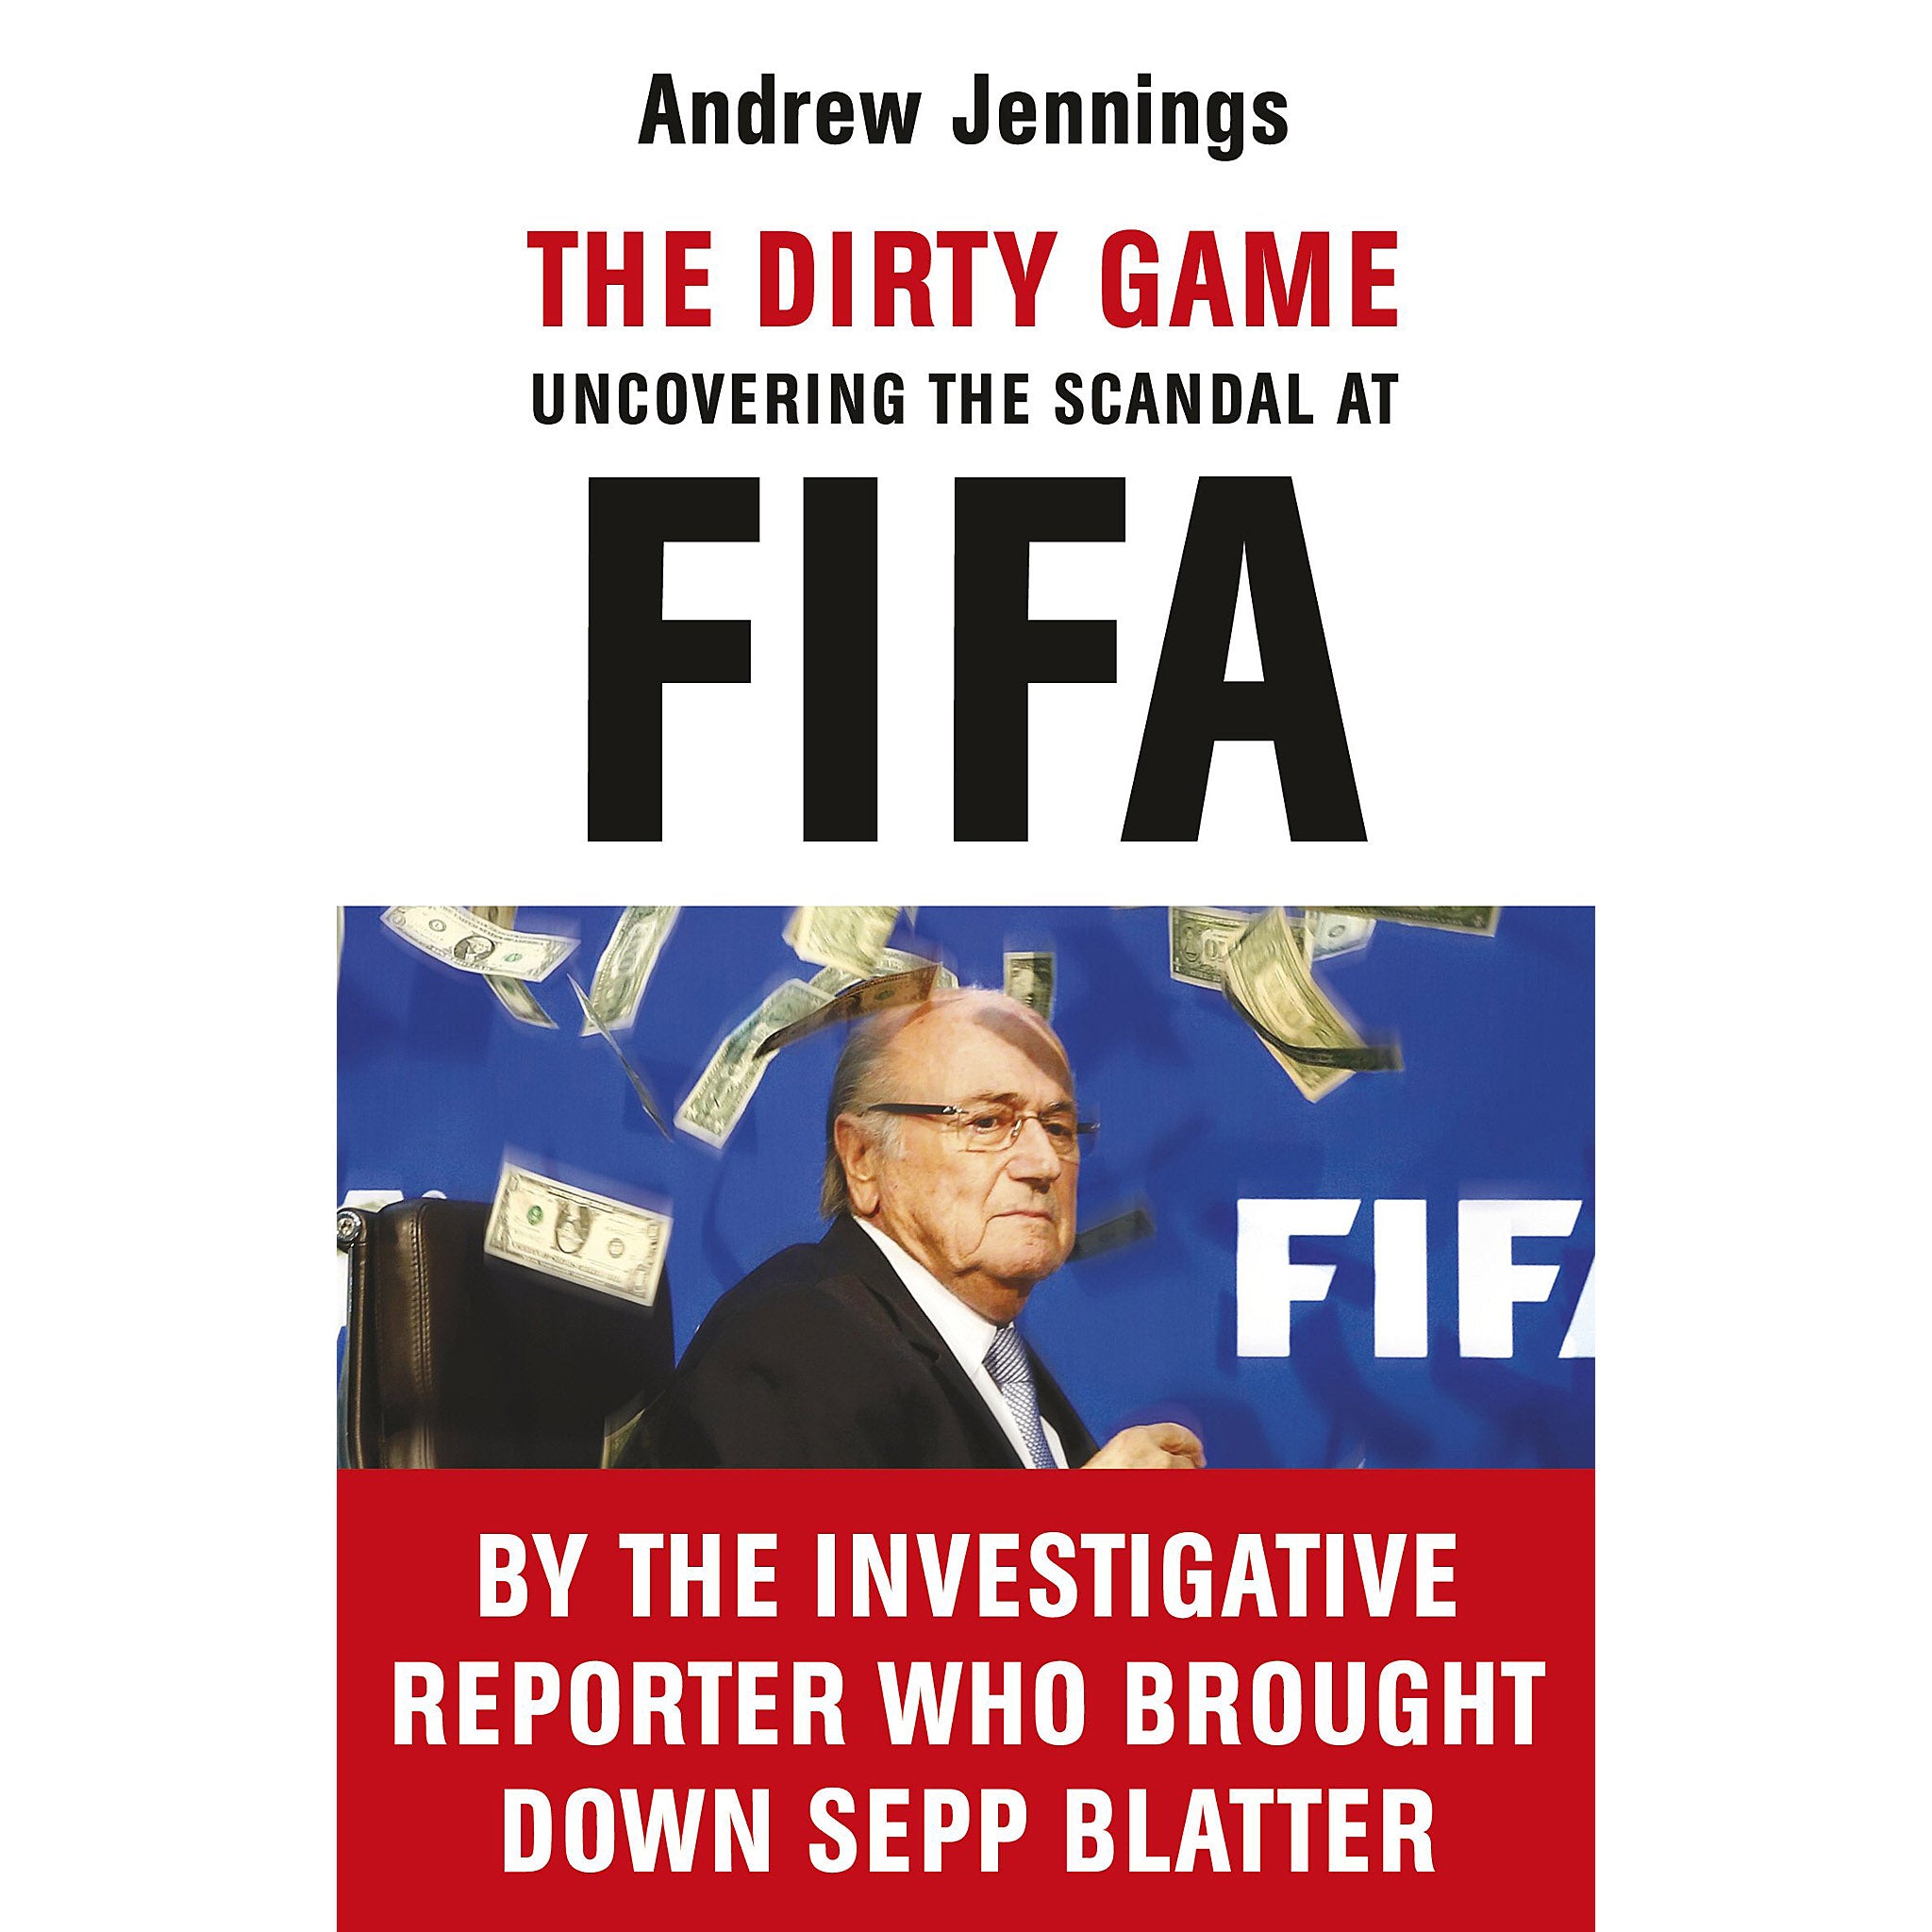 The Dirty Game – Uncovering the Scandal at FIFA